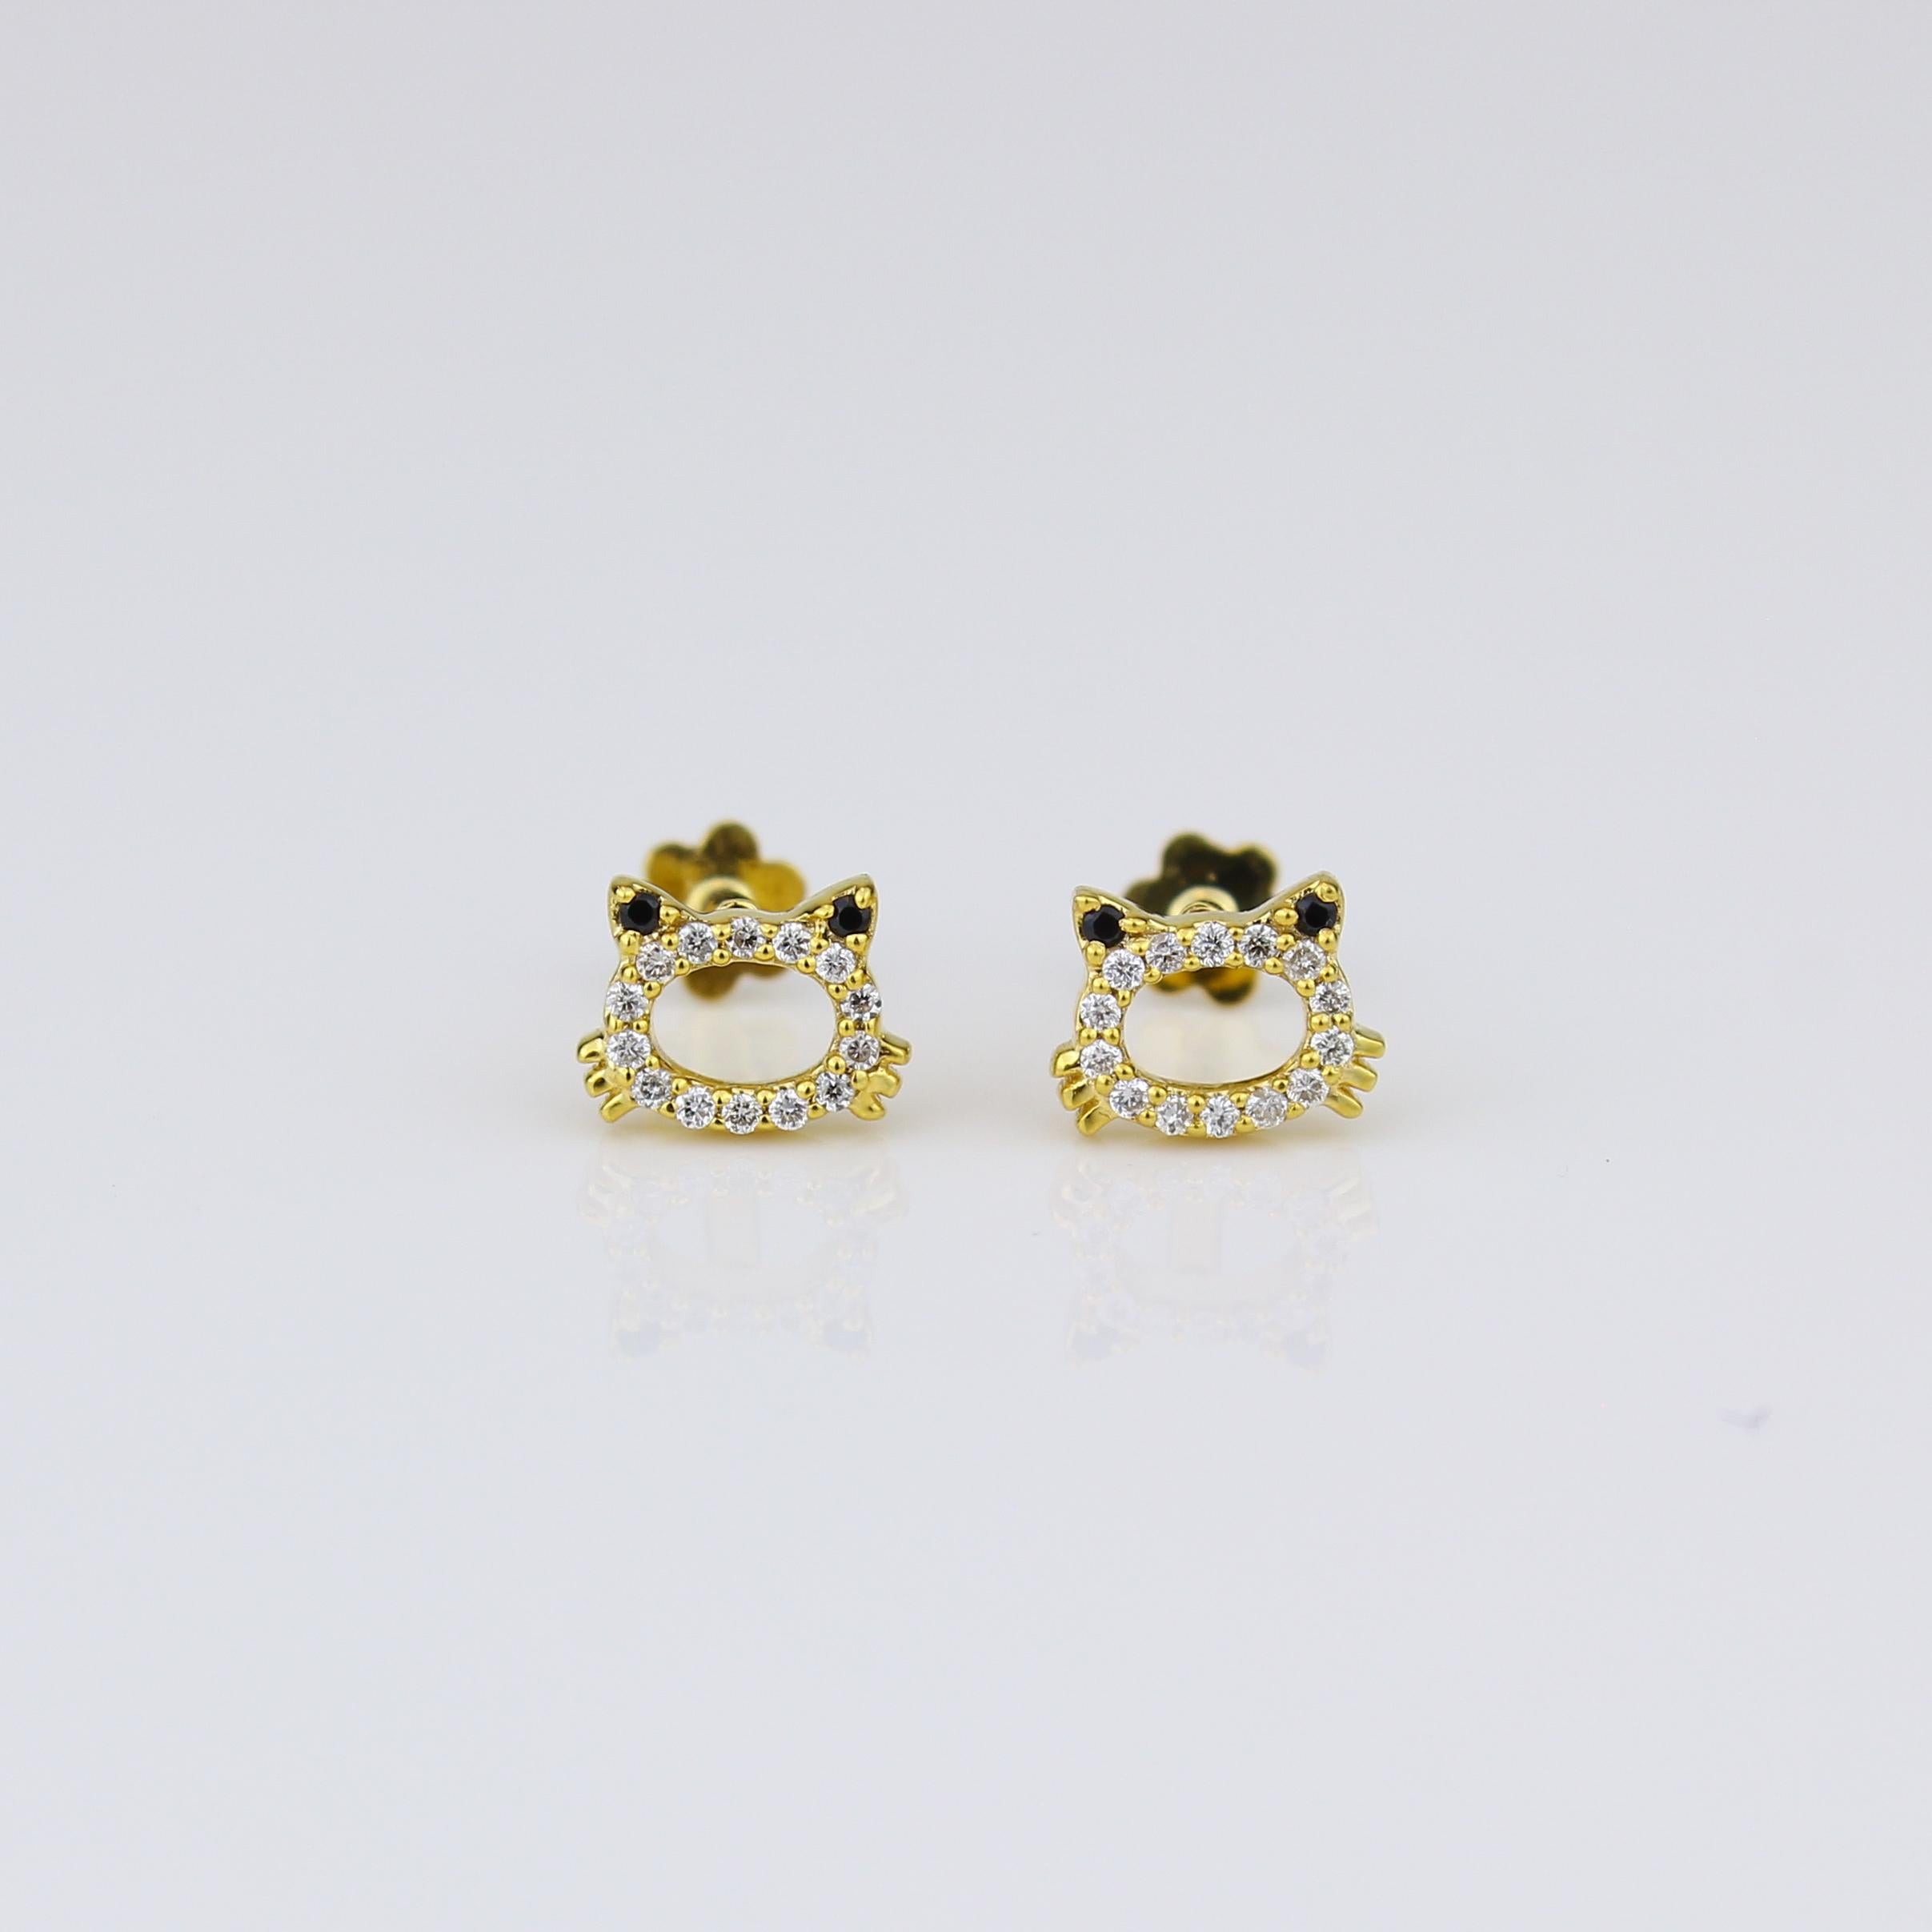 Adorable Crab Diamond Earrings crafted for Girls (Kids/Toddlers) in exquisite 18K Solid Gold. These whimsical earrings feature playful crab motifs adorned with delicate diamonds, bringing a touch of seaside charm to your child's style, all while